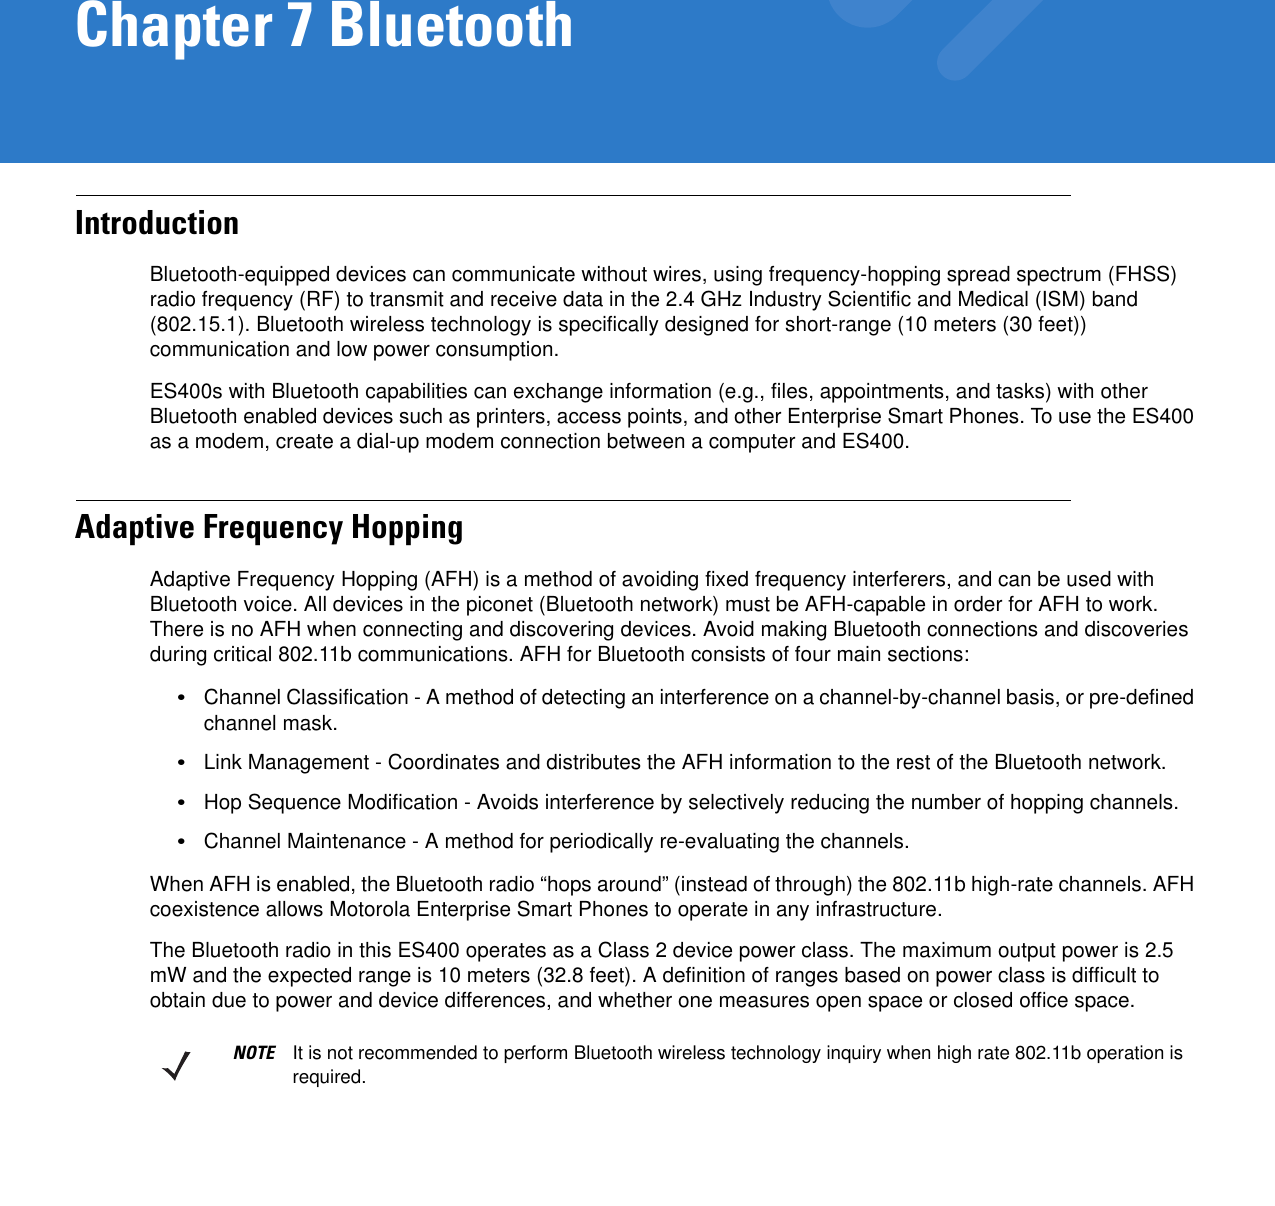 Chapter 7 BluetoothIntroductionBluetooth-equipped devices can communicate without wires, using frequency-hopping spread spectrum (FHSS) radio frequency (RF) to transmit and receive data in the 2.4 GHz Industry Scientific and Medical (ISM) band (802.15.1). Bluetooth wireless technology is specifically designed for short-range (10 meters (30 feet)) communication and low power consumption. ES400s with Bluetooth capabilities can exchange information (e.g., files, appointments, and tasks) with other Bluetooth enabled devices such as printers, access points, and other Enterprise Smart Phones. To use the ES400 as a modem, create a dial-up modem connection between a computer and ES400.Adaptive Frequency HoppingAdaptive Frequency Hopping (AFH) is a method of avoiding fixed frequency interferers, and can be used with Bluetooth voice. All devices in the piconet (Bluetooth network) must be AFH-capable in order for AFH to work. There is no AFH when connecting and discovering devices. Avoid making Bluetooth connections and discoveries during critical 802.11b communications. AFH for Bluetooth consists of four main sections:•Channel Classification - A method of detecting an interference on a channel-by-channel basis, or pre-defined channel mask.•Link Management - Coordinates and distributes the AFH information to the rest of the Bluetooth network.•Hop Sequence Modification - Avoids interference by selectively reducing the number of hopping channels.•Channel Maintenance - A method for periodically re-evaluating the channels.When AFH is enabled, the Bluetooth radio “hops around” (instead of through) the 802.11b high-rate channels. AFH coexistence allows Motorola Enterprise Smart Phones to operate in any infrastructure. The Bluetooth radio in this ES400 operates as a Class 2 device power class. The maximum output power is 2.5 mW and the expected range is 10 meters (32.8 feet). A definition of ranges based on power class is difficult to obtain due to power and device differences, and whether one measures open space or closed office space. NOTE It is not recommended to perform Bluetooth wireless technology inquiry when high rate 802.11b operation is required.